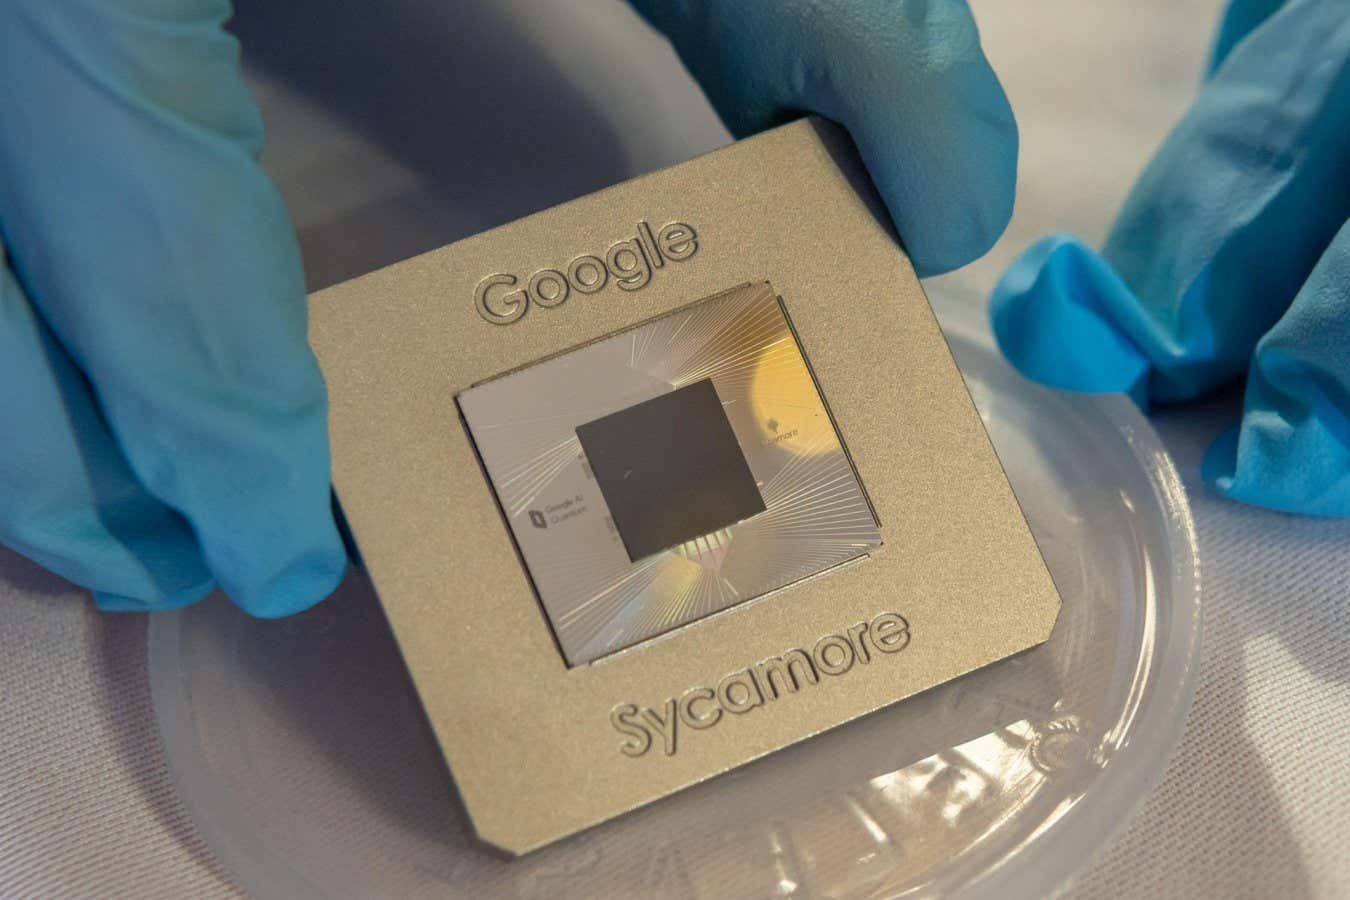 Google’s claim of quantum supremacy has been completely smashed